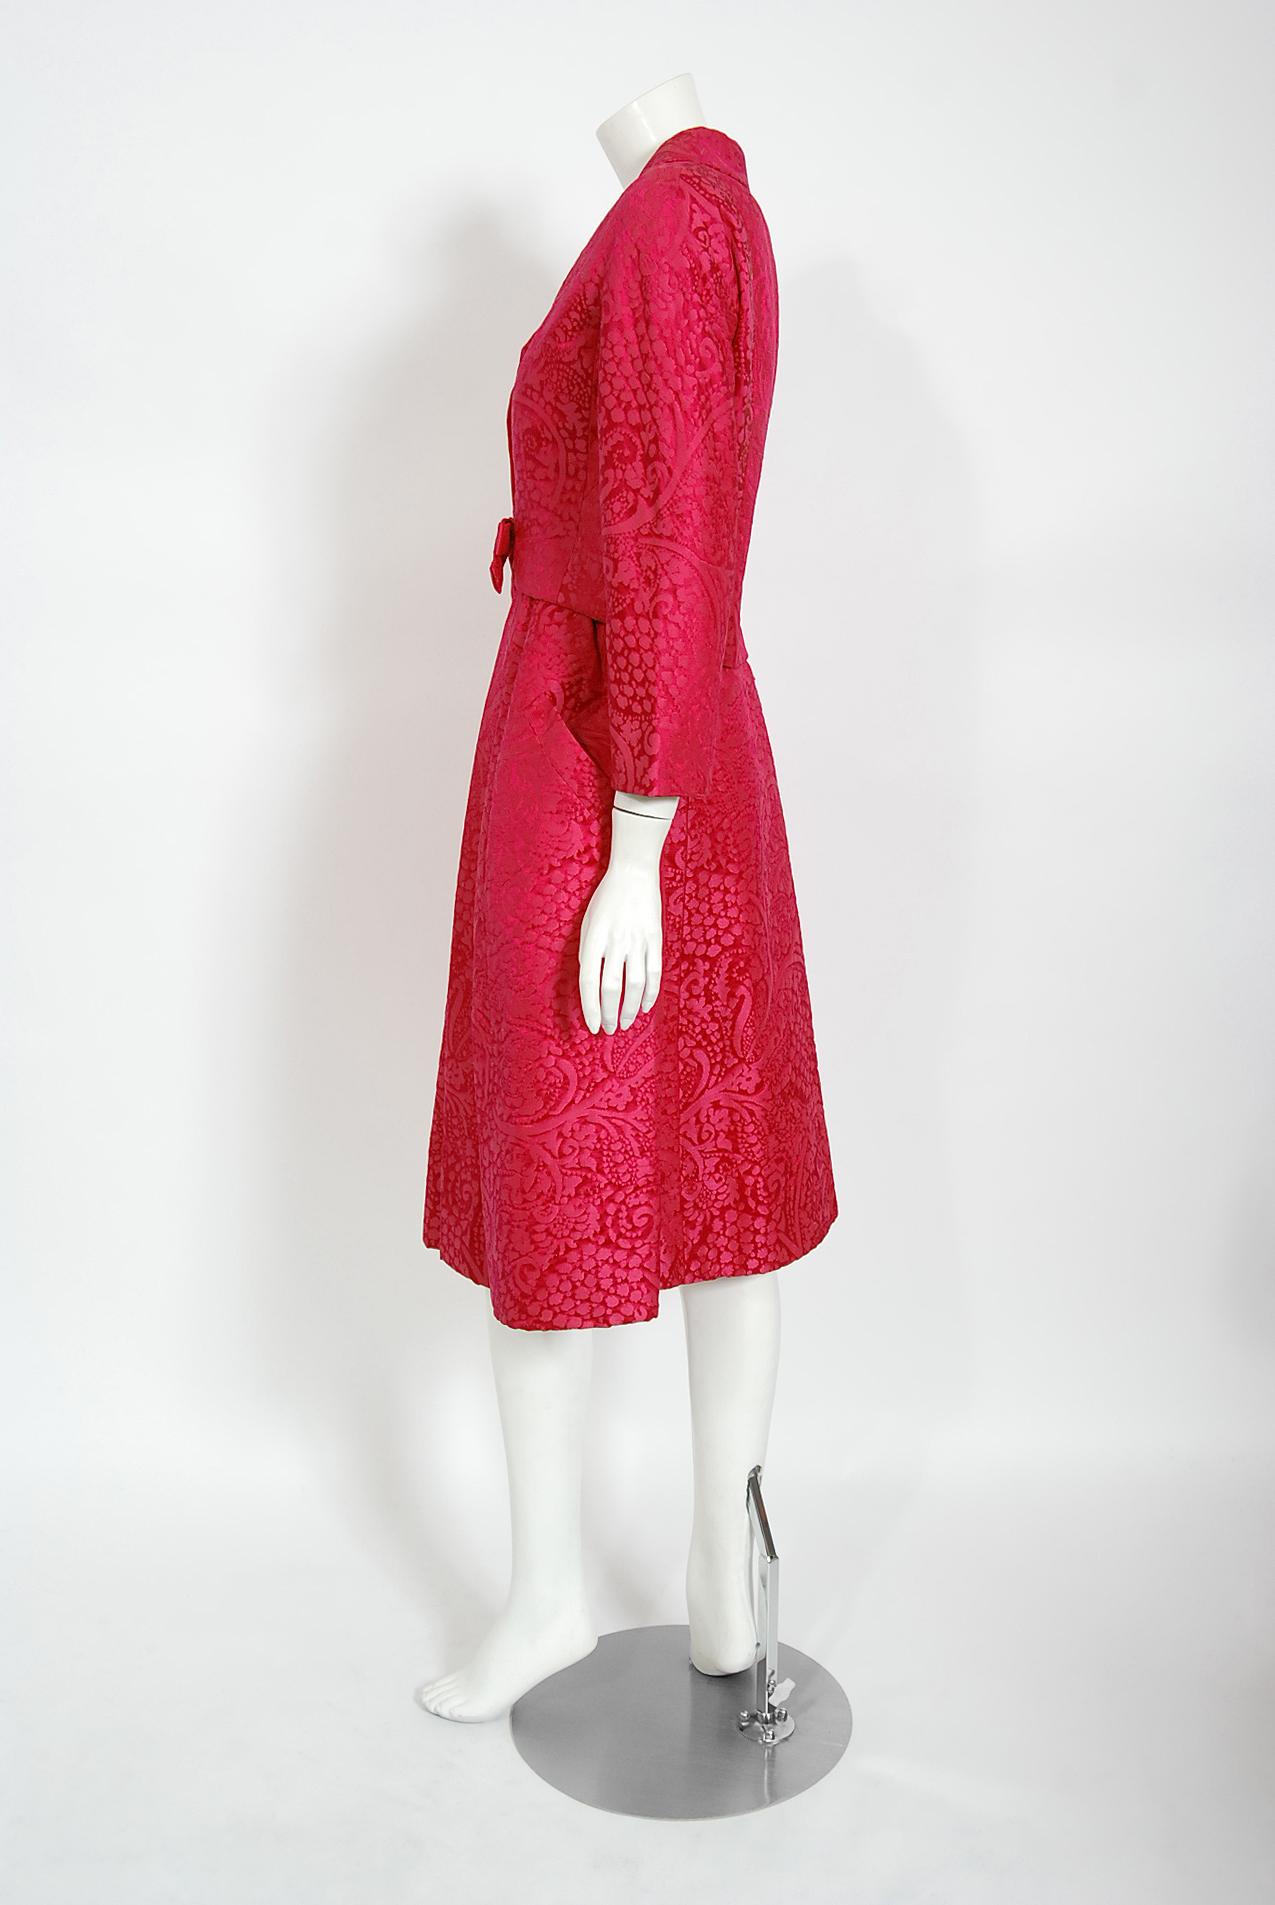 Women's Vintage 1962 Christian Dior Haute Couture Pink Textured Silk Dress & Bow Jacket